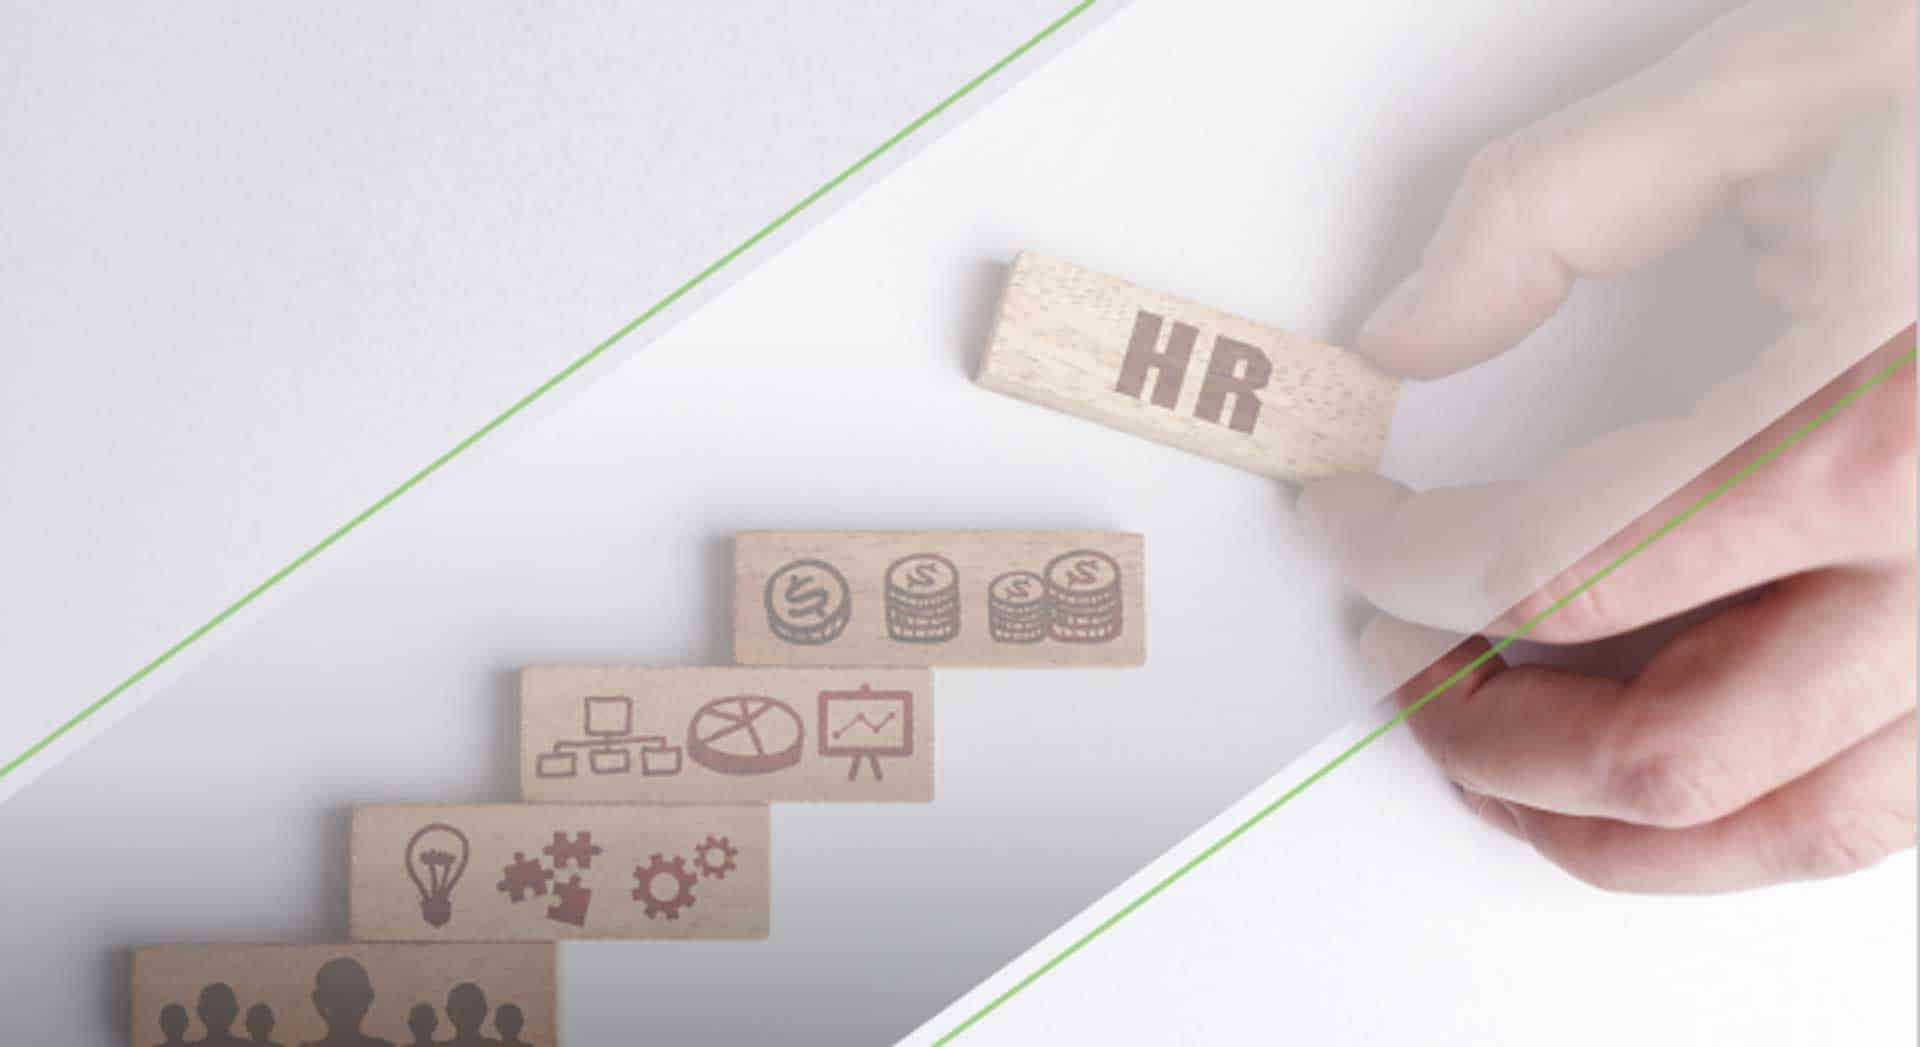 Helping and collaborating with HR human resources